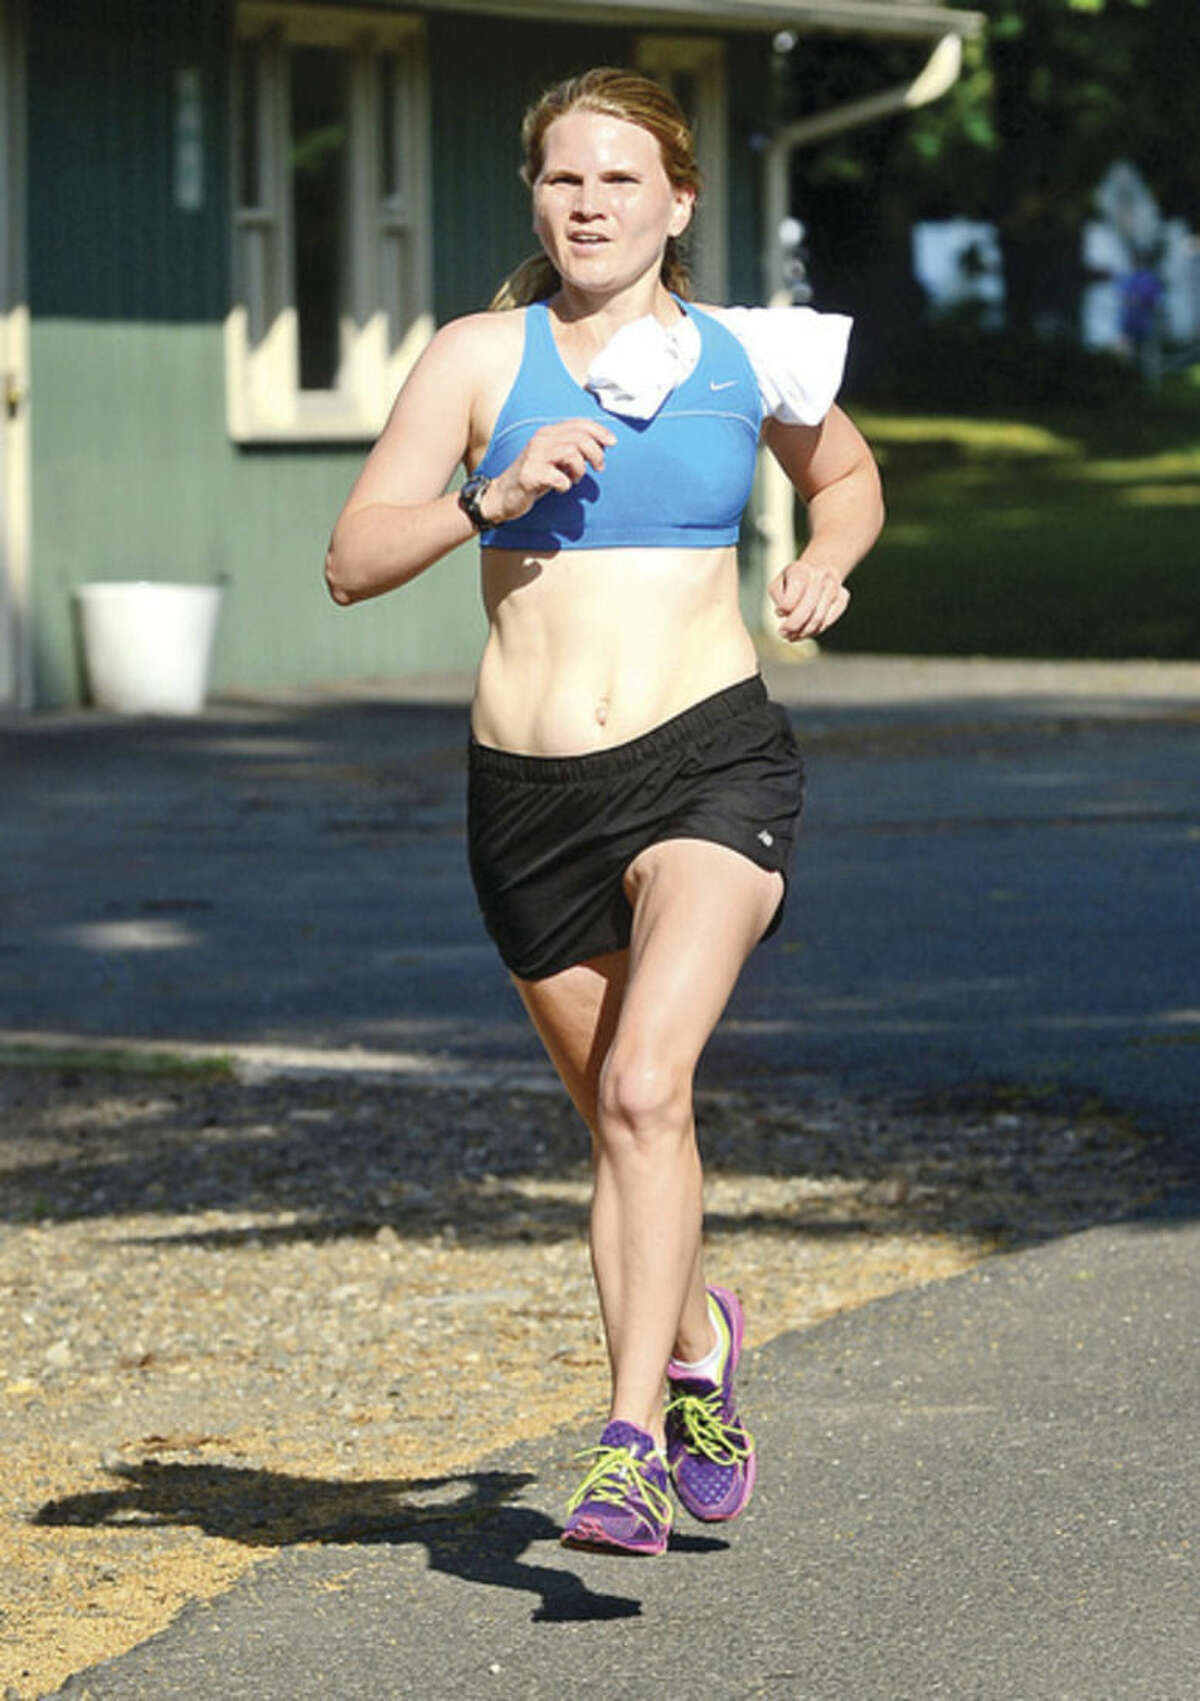 Hour photo / Erik Trautmann Kate Pfeffer finishes first for the women in the 3.1 mile race during the Westport Road Runners Summer Series Saturday at Longshore Park.